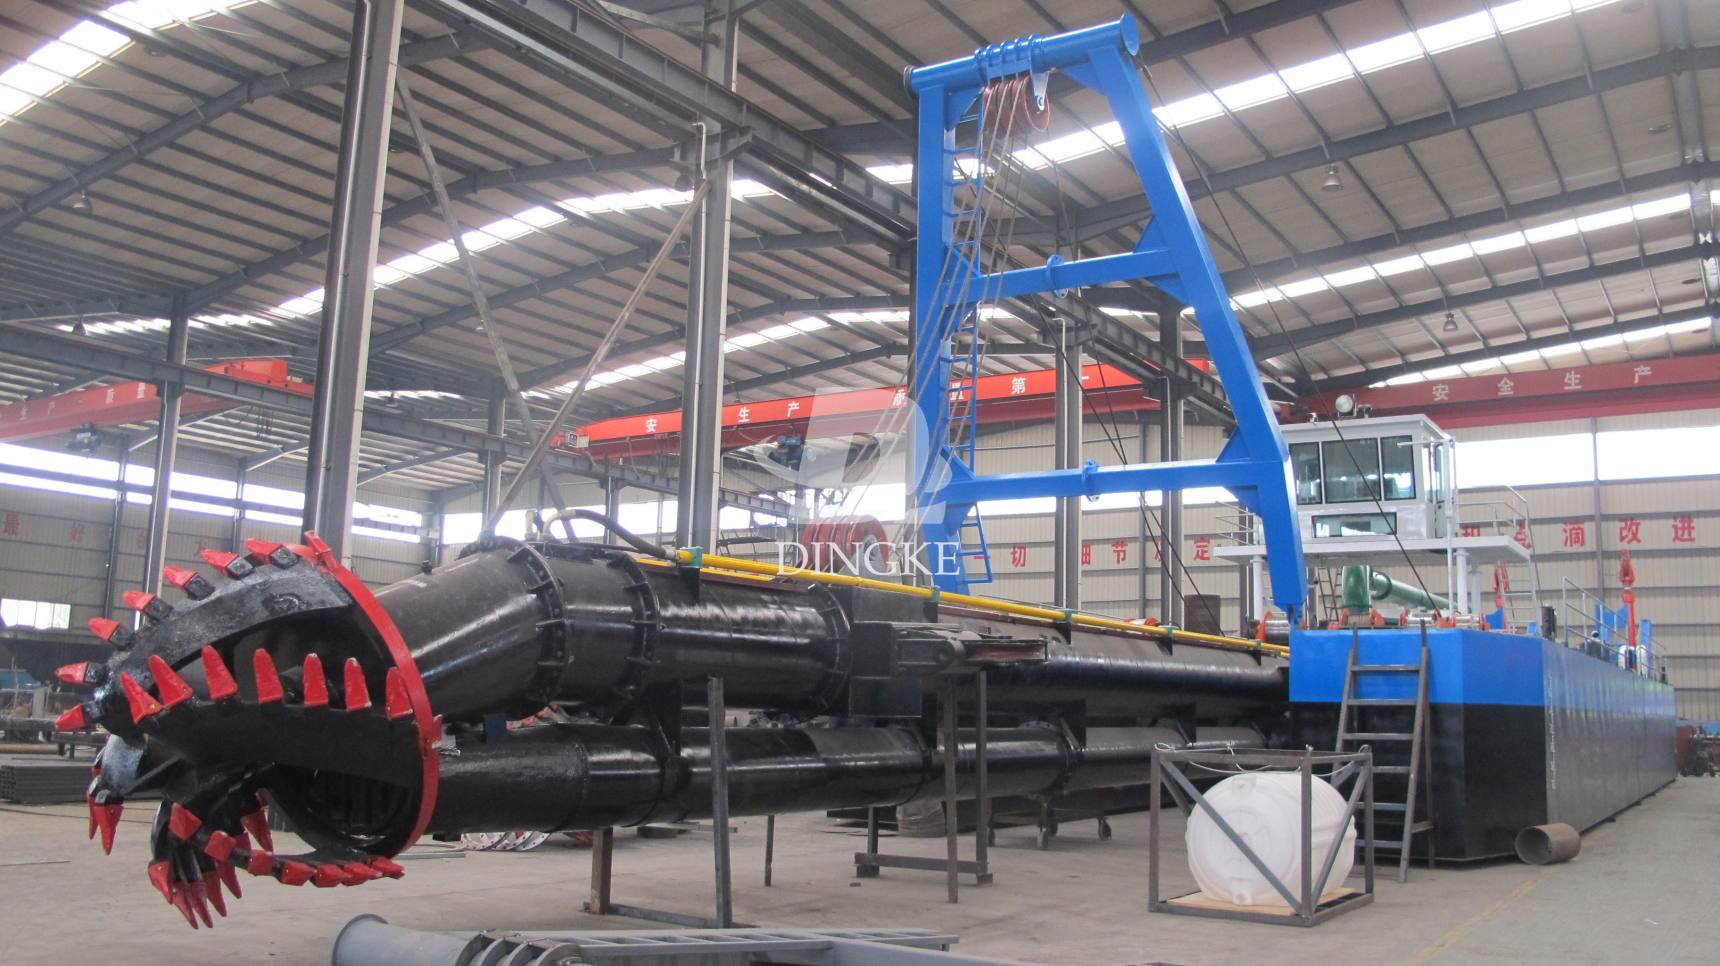 20 Inch Cutter Suction Dredger with Low Price and Good Quality